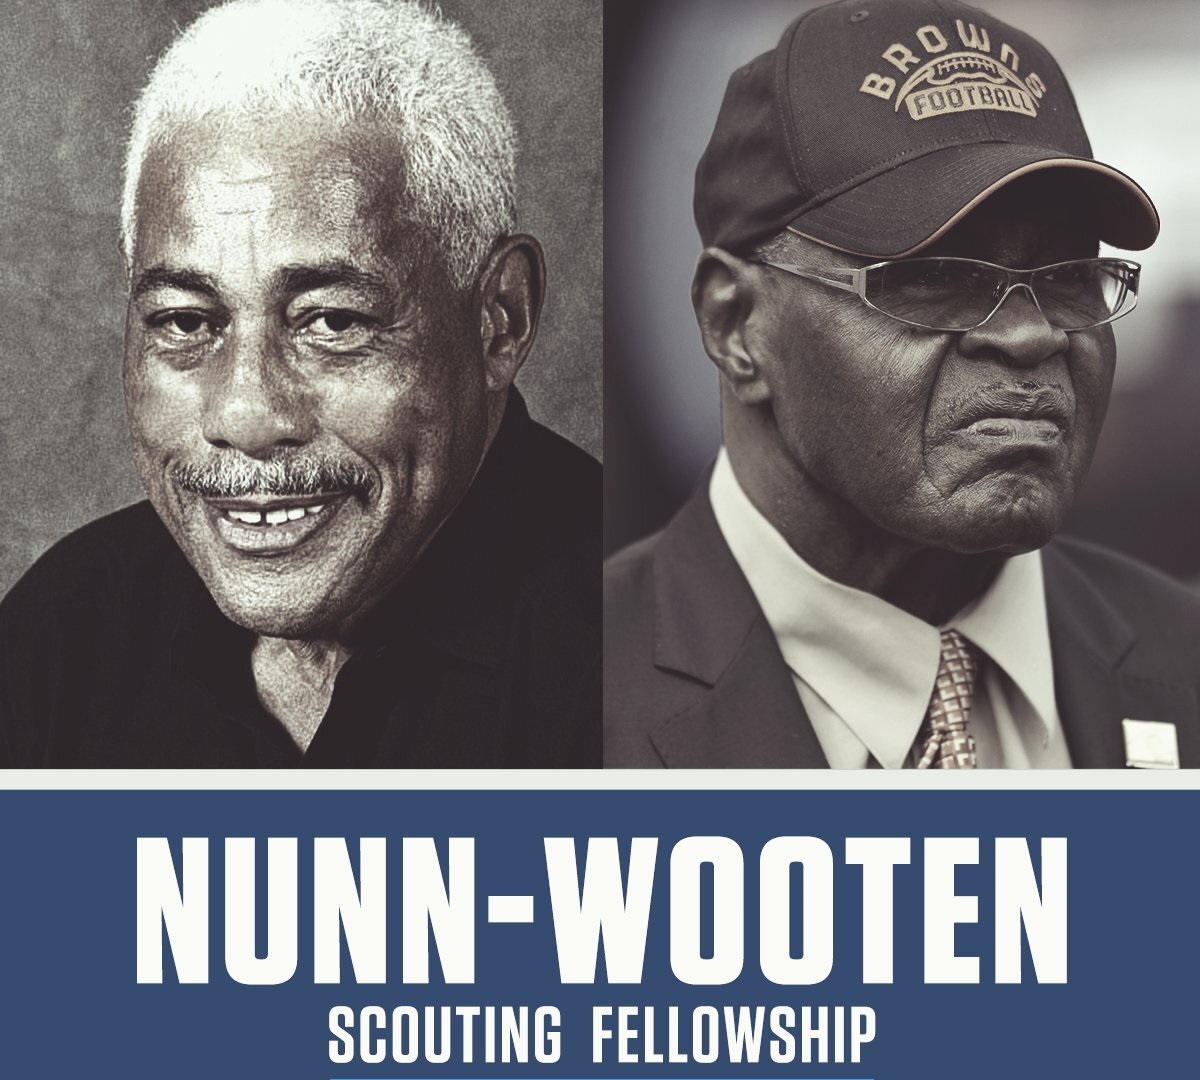 The @NFL’s Nunn-Wooten Scouting Fellowship exposes interested and qualified candidates to a career in professional scouting. Learn more about the fellowship and apply by June 14: ops.nfl.com/2OkIKIE